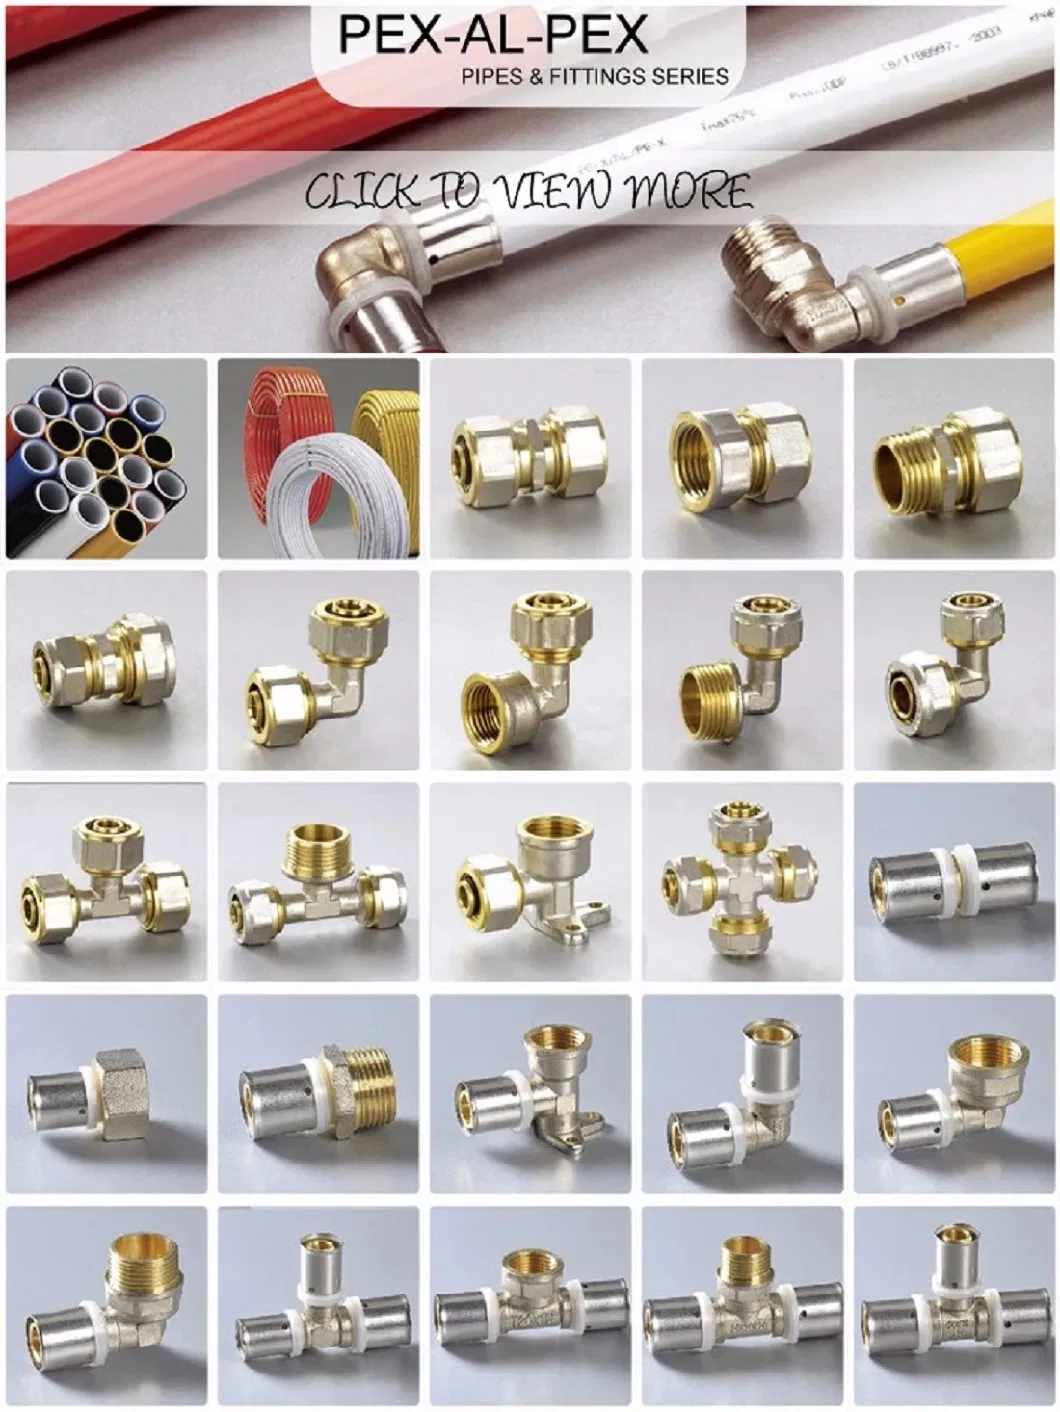 Straight Male Plumbing Screw Coupling Pipe Fittings Brass Compression Fitting